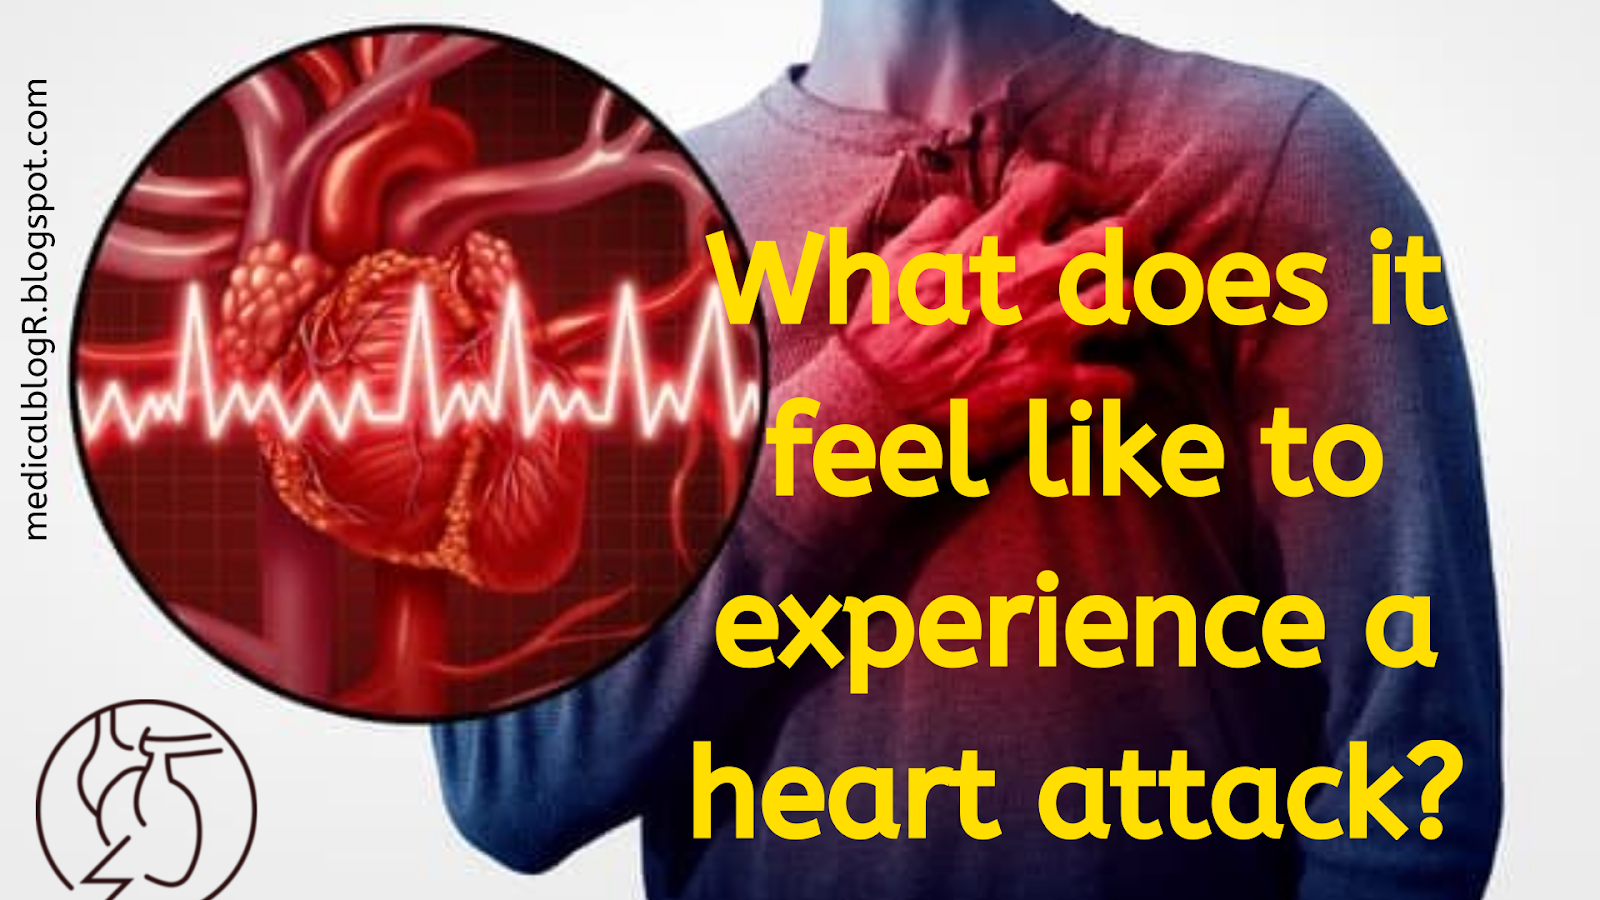 What does it feel like to experience a heart attack?